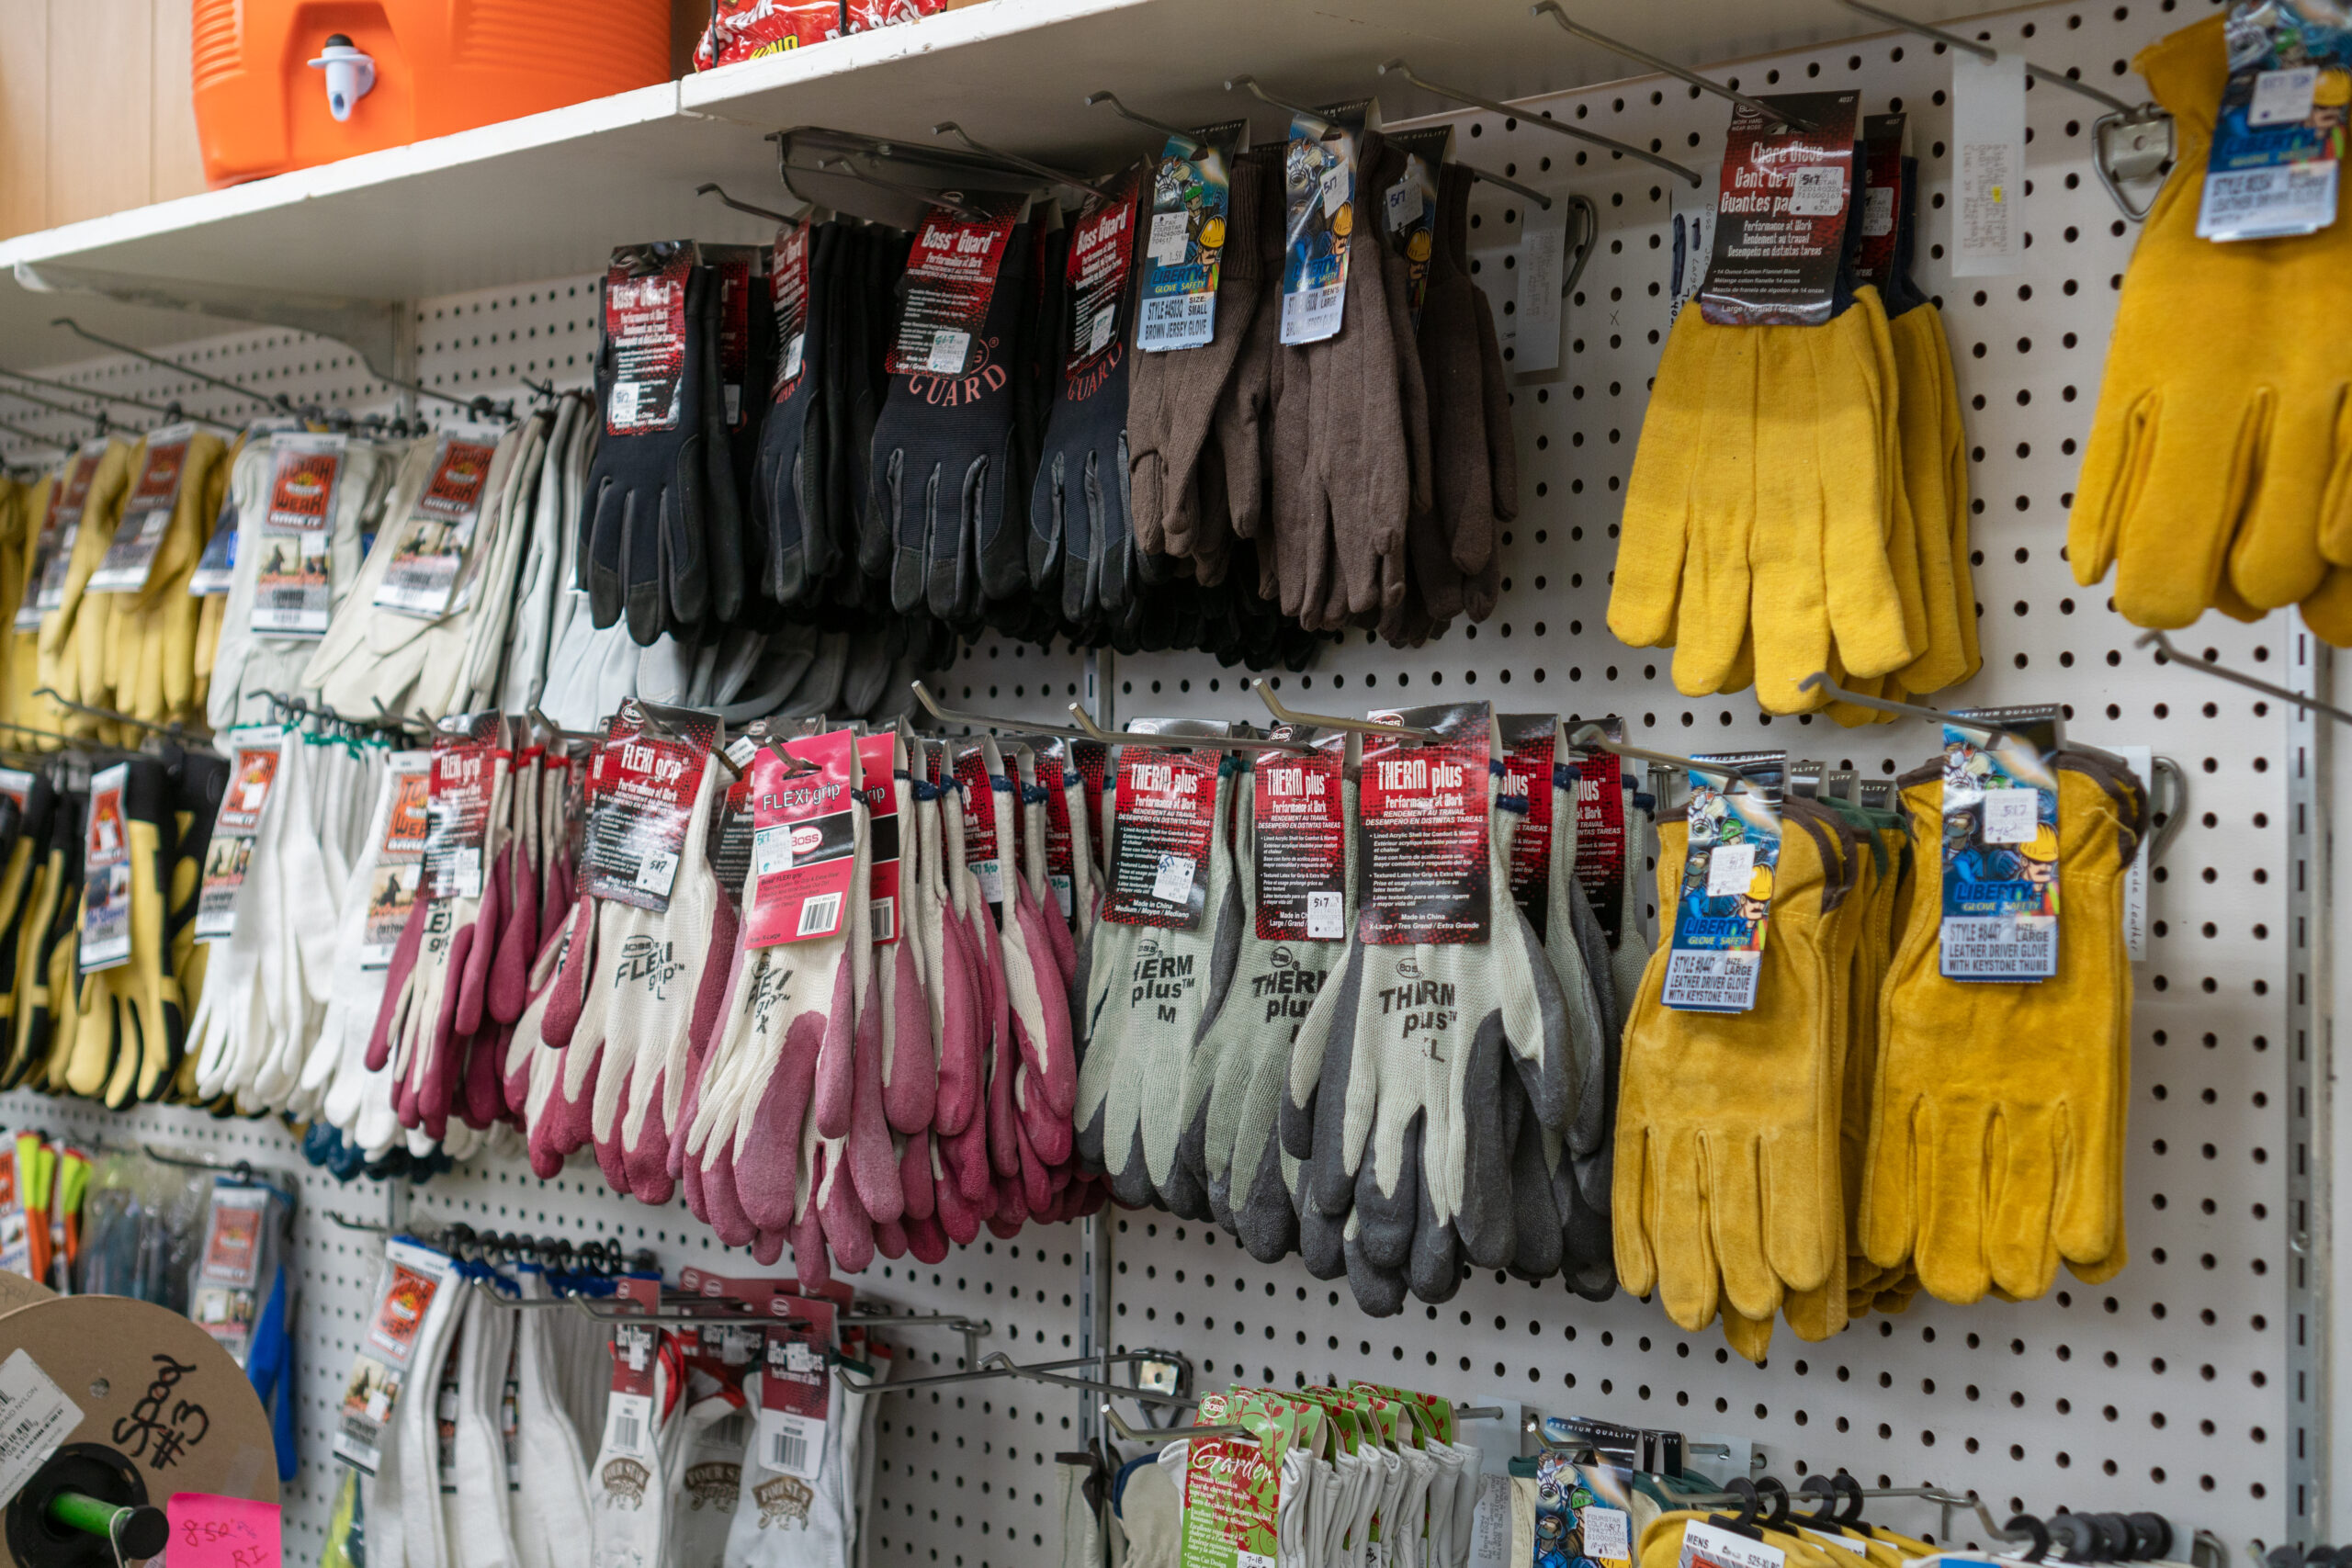 Work Gloves for sale at the Dust Four Star Supply